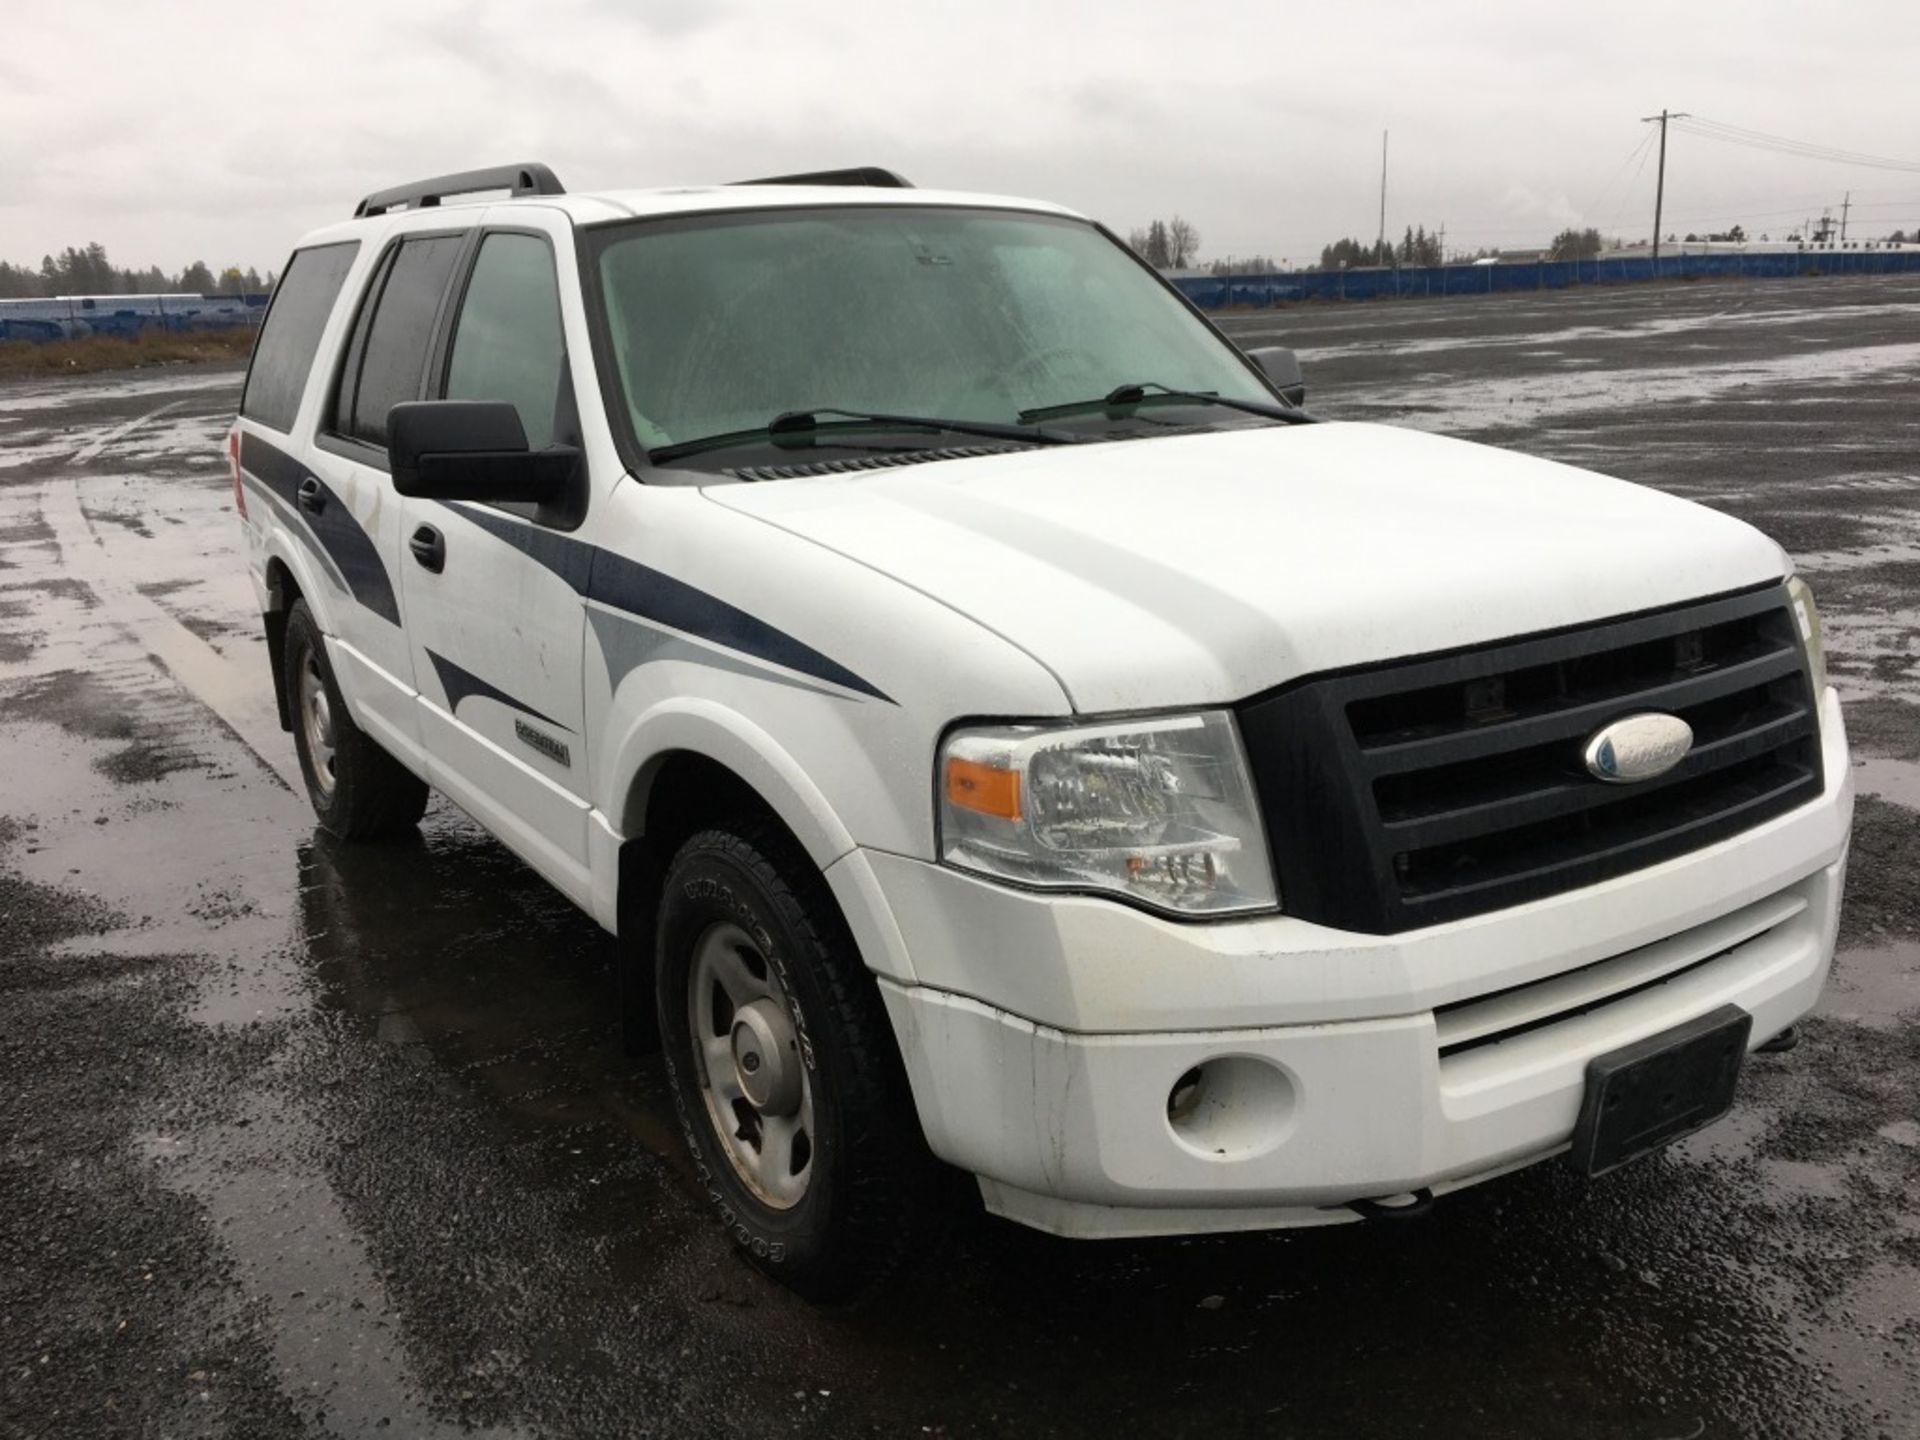 2008 Ford Expedition XLT 4x4 SUV - Image 7 of 34